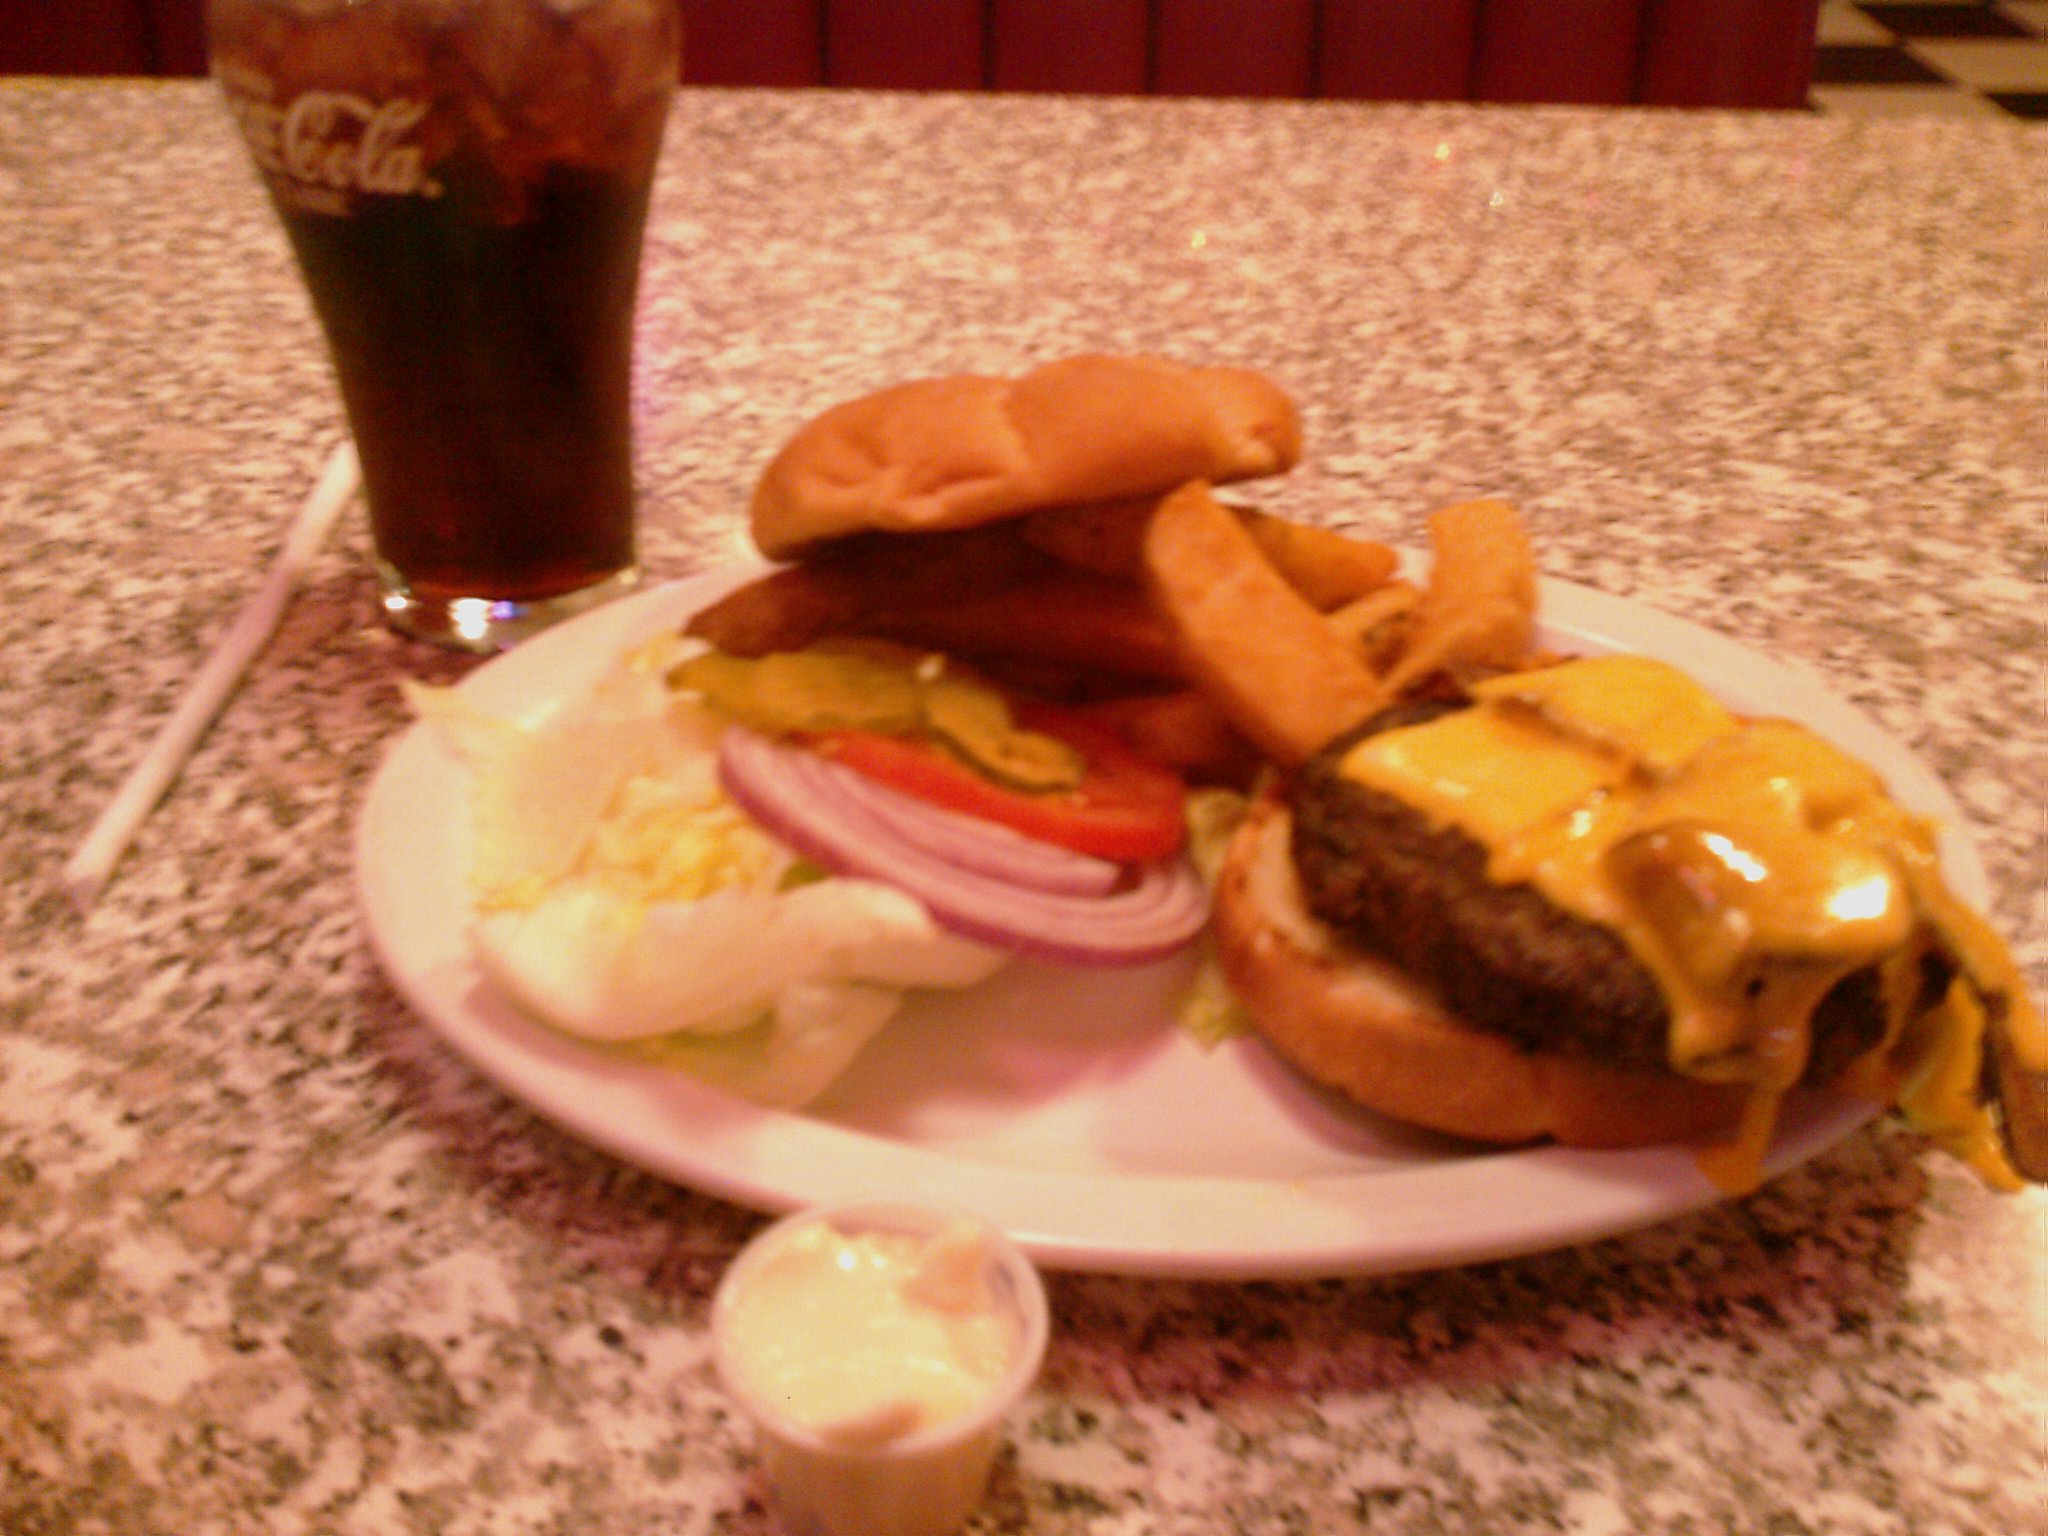 cheeseburger on a white plate with a drink and drink